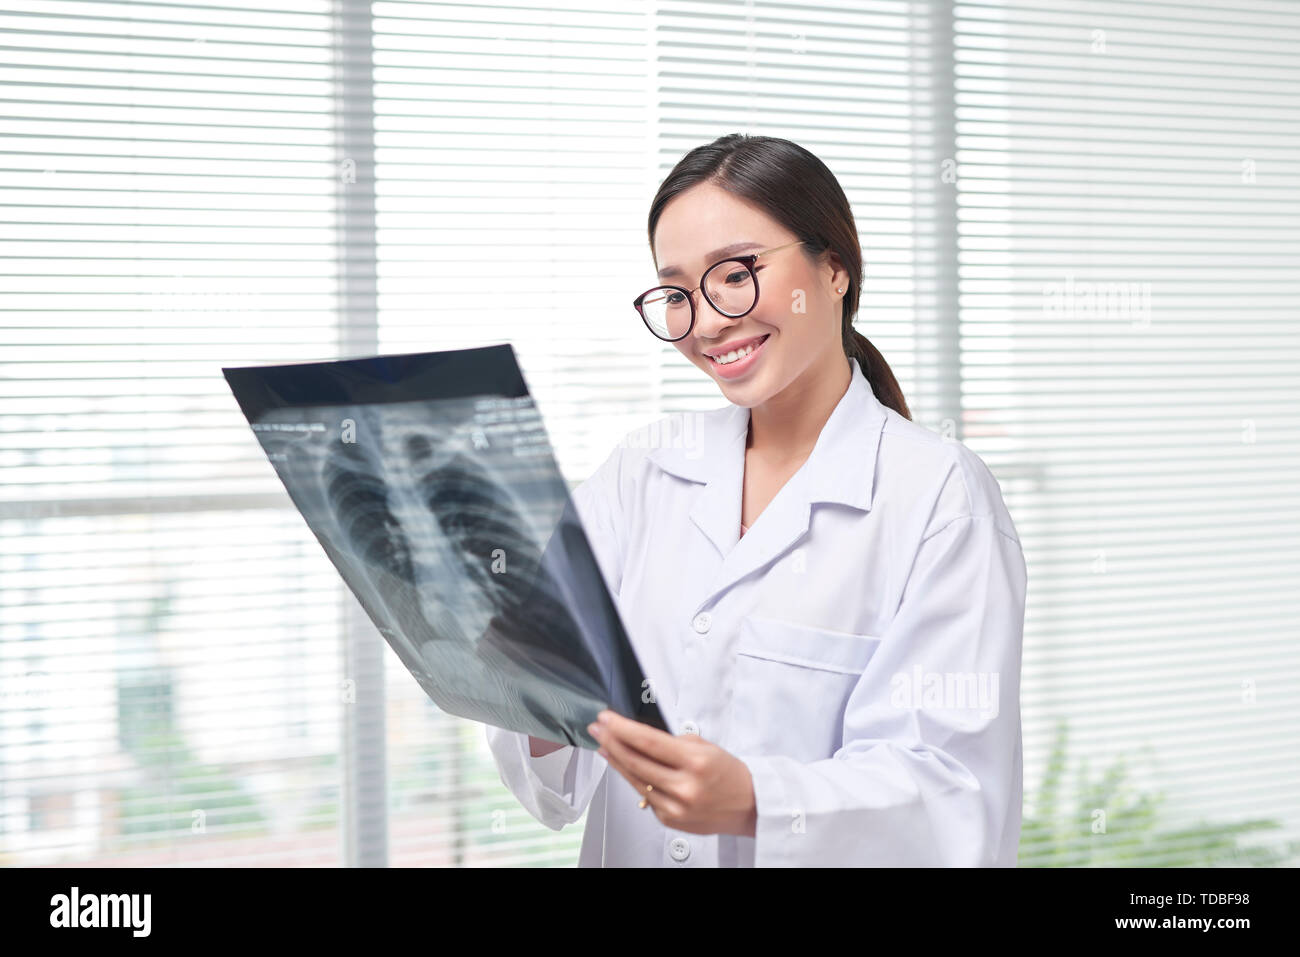 Confident female doctor examining accurately a rib cage x-ray Stock Photo